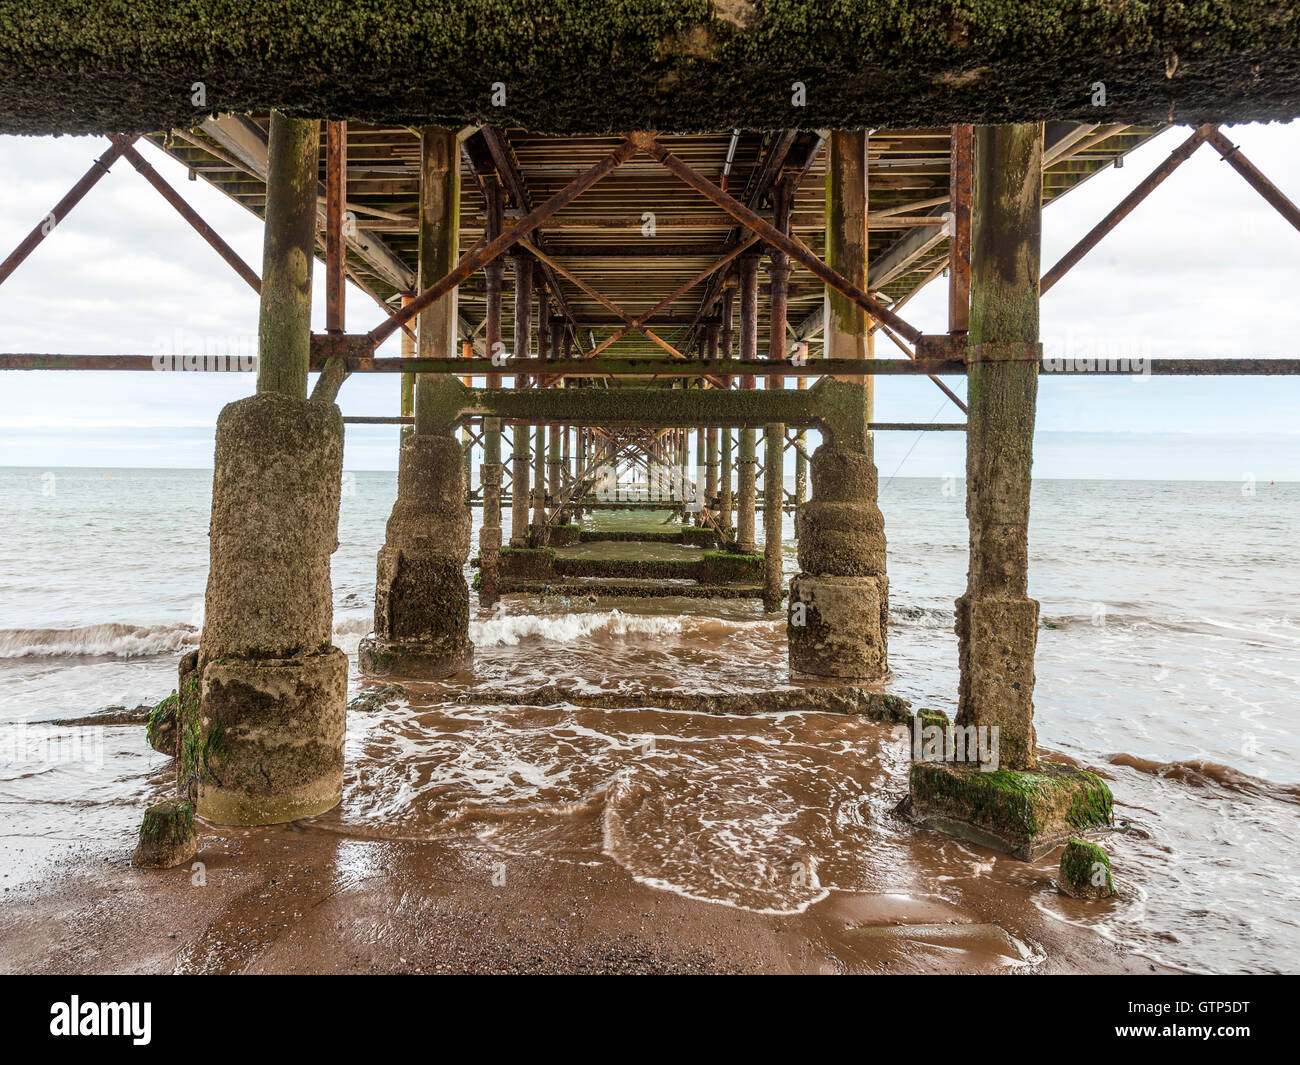 Landscape depicting the seashore along Teignmouth beach at Teignmouth, with views of the Grand Pier Structure. Stock Photo